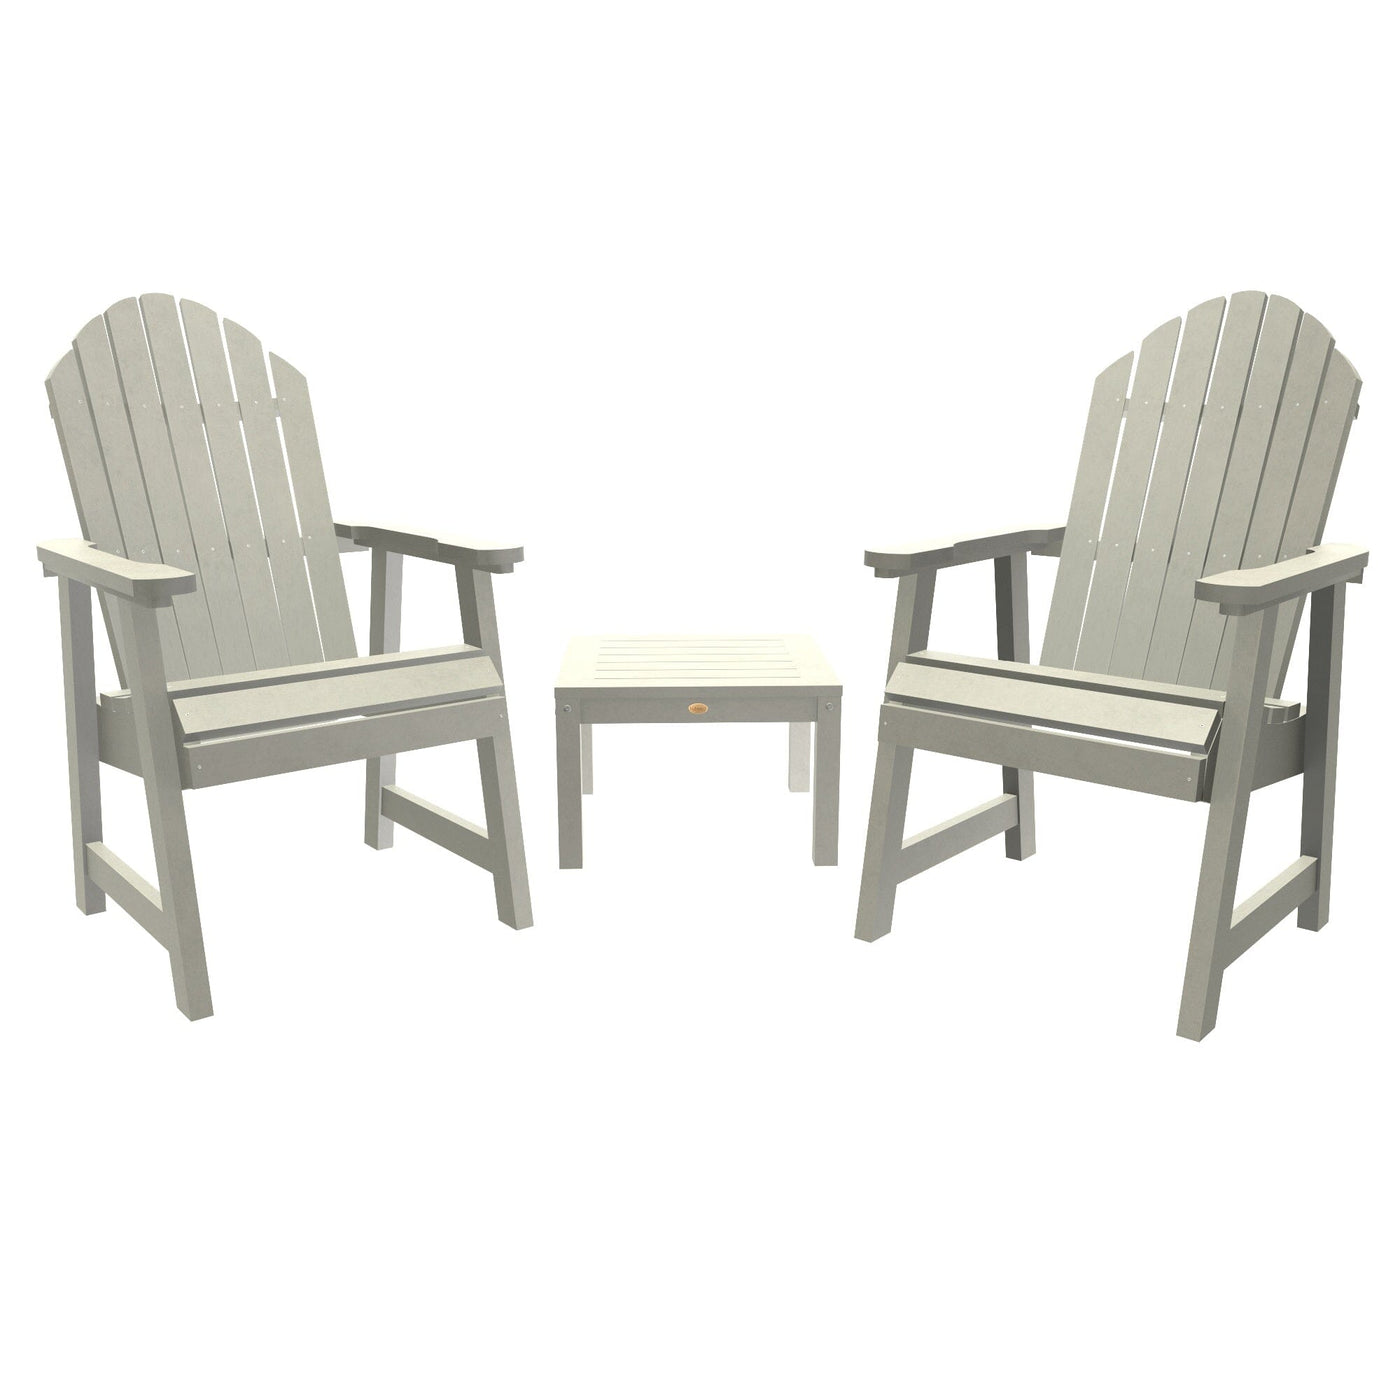 2 Hamilton Deck Chairs with Adirondack Side Table Kitted Sets Highwood USA Harbor Gray 